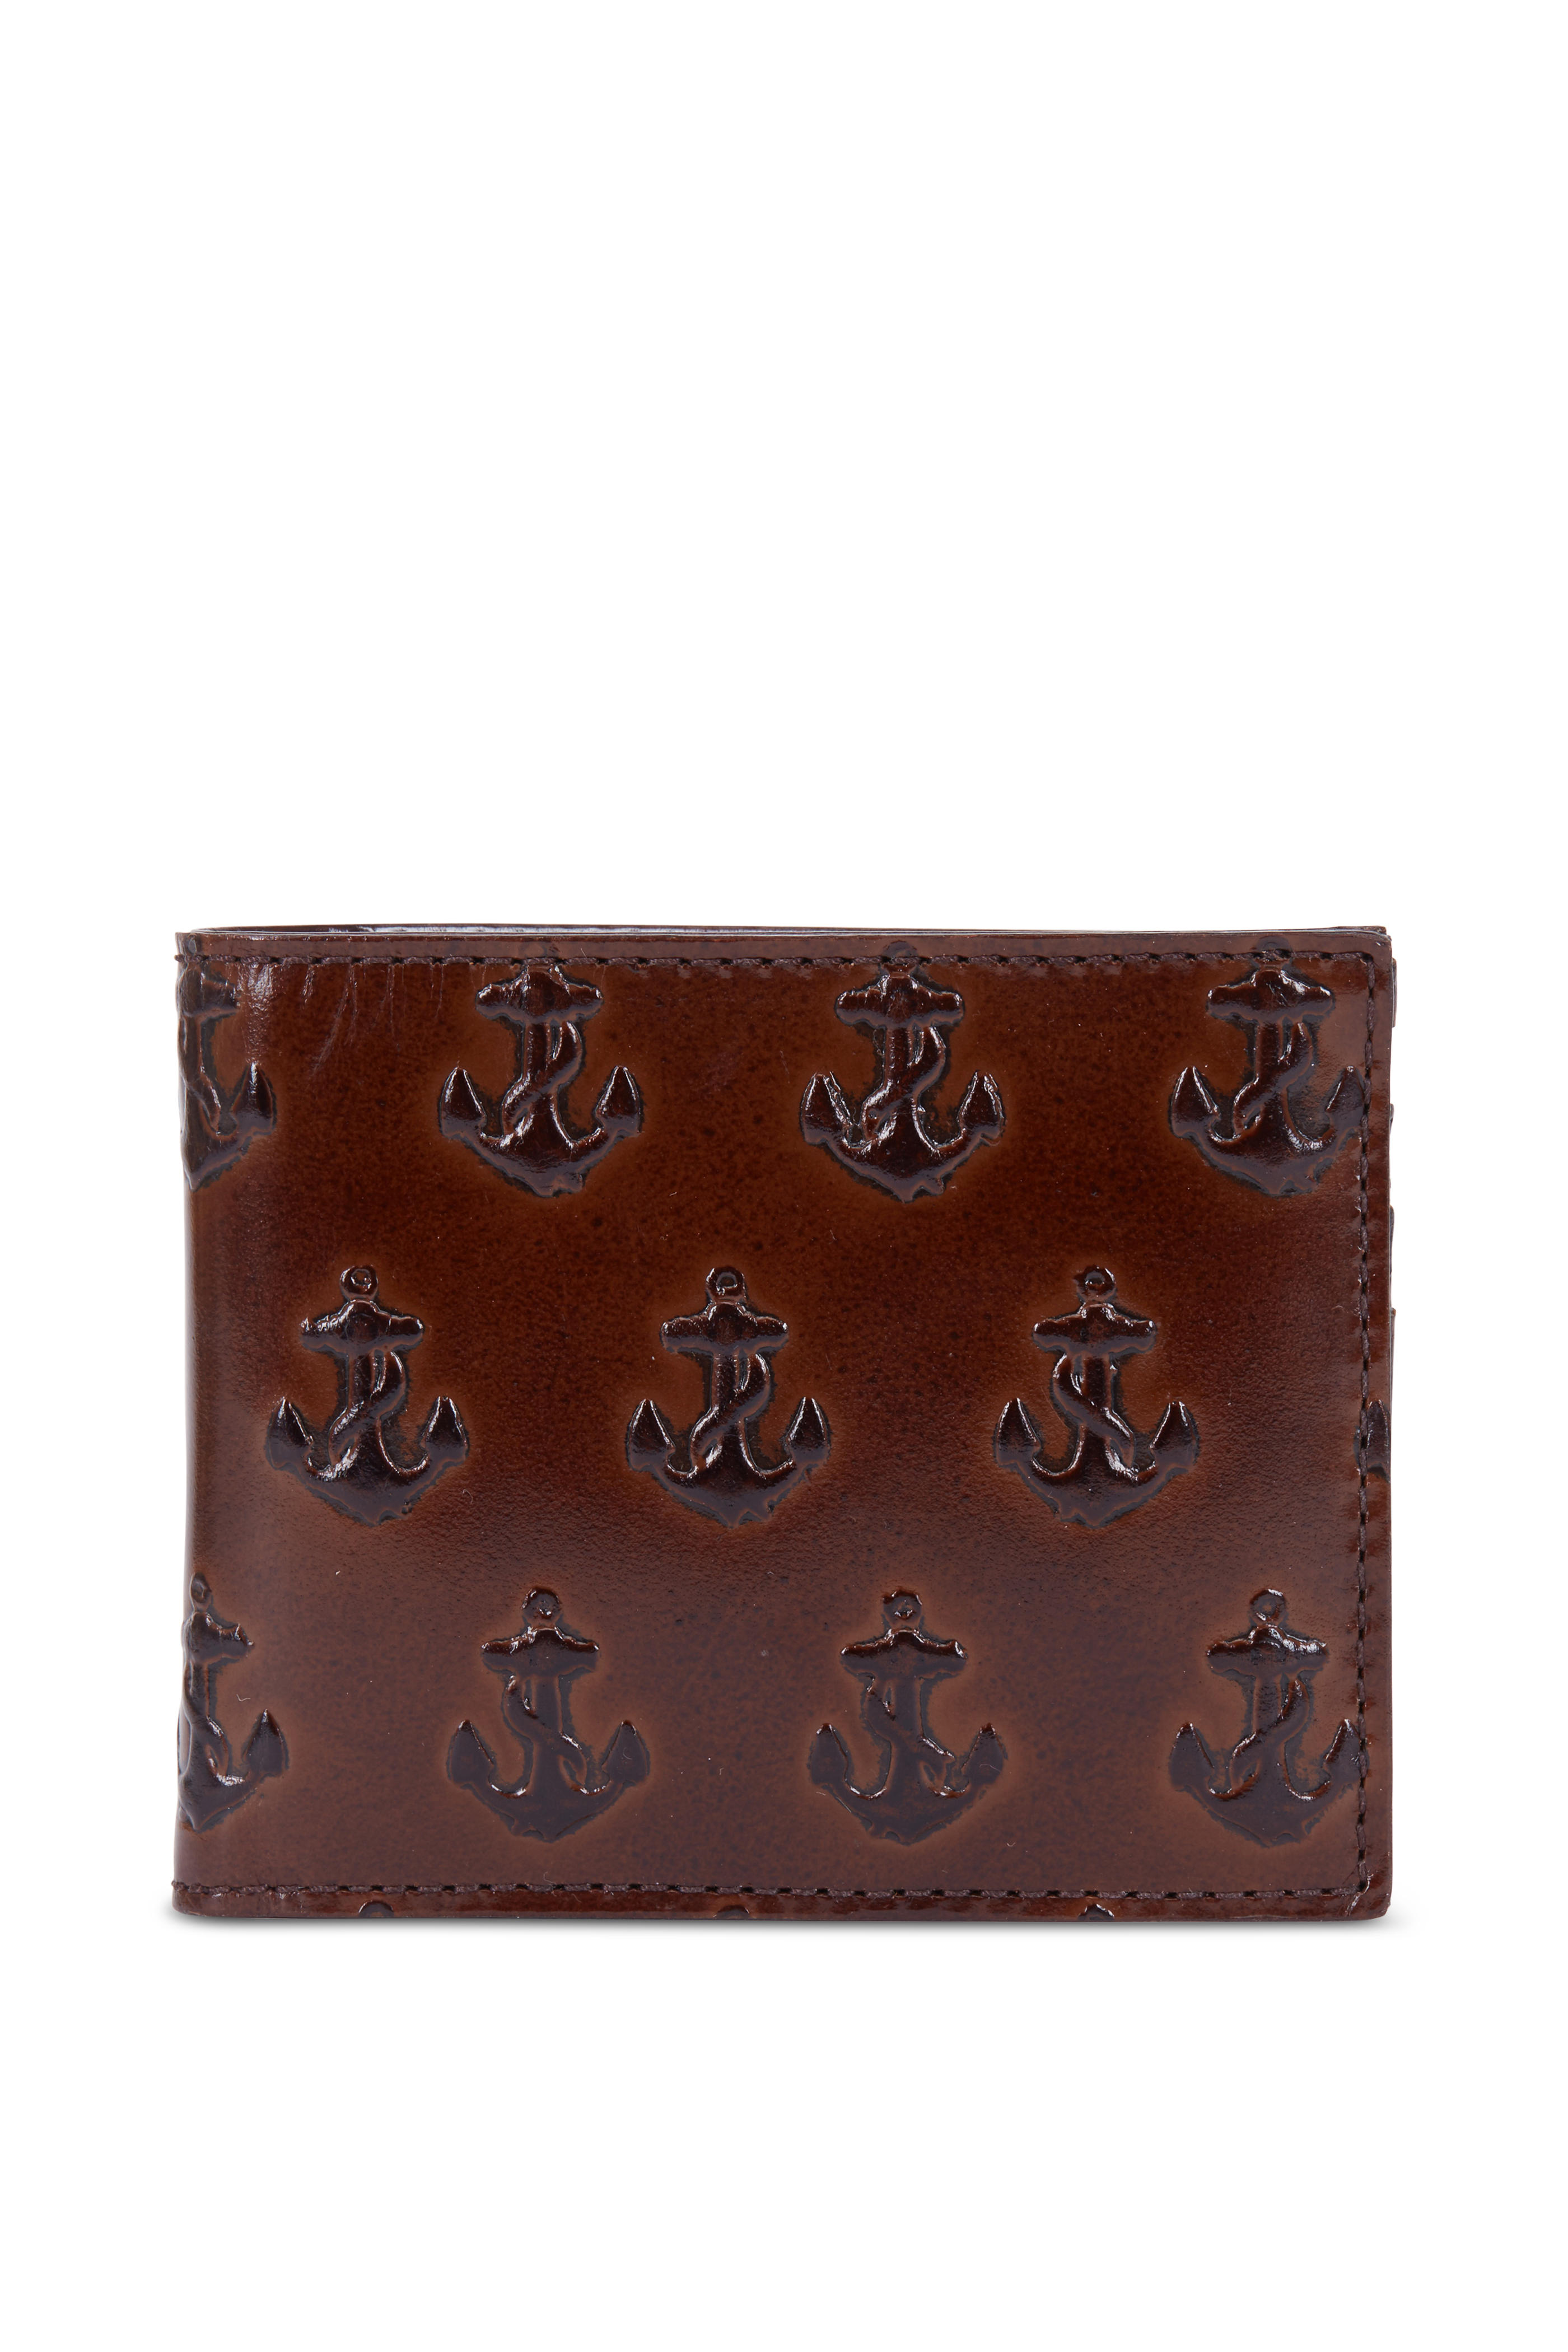 Jack Spade Chocolate Leather Anchor Embossed Wallet